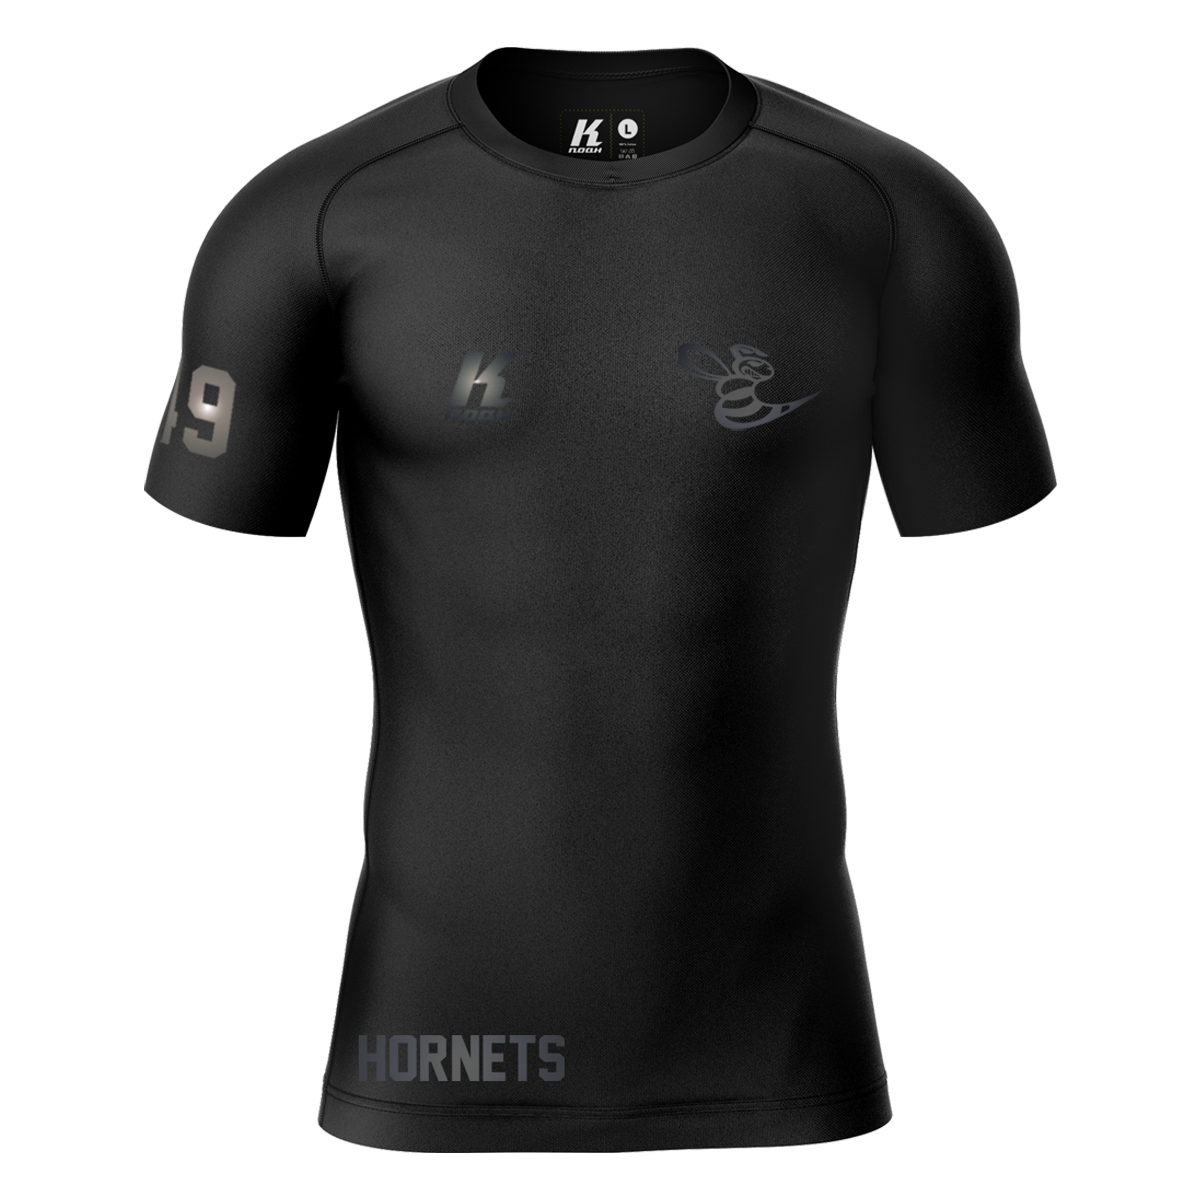 Hornets "Blackline" K.Tech Compression Shortsleeve Shirt with Playernumber/Initials